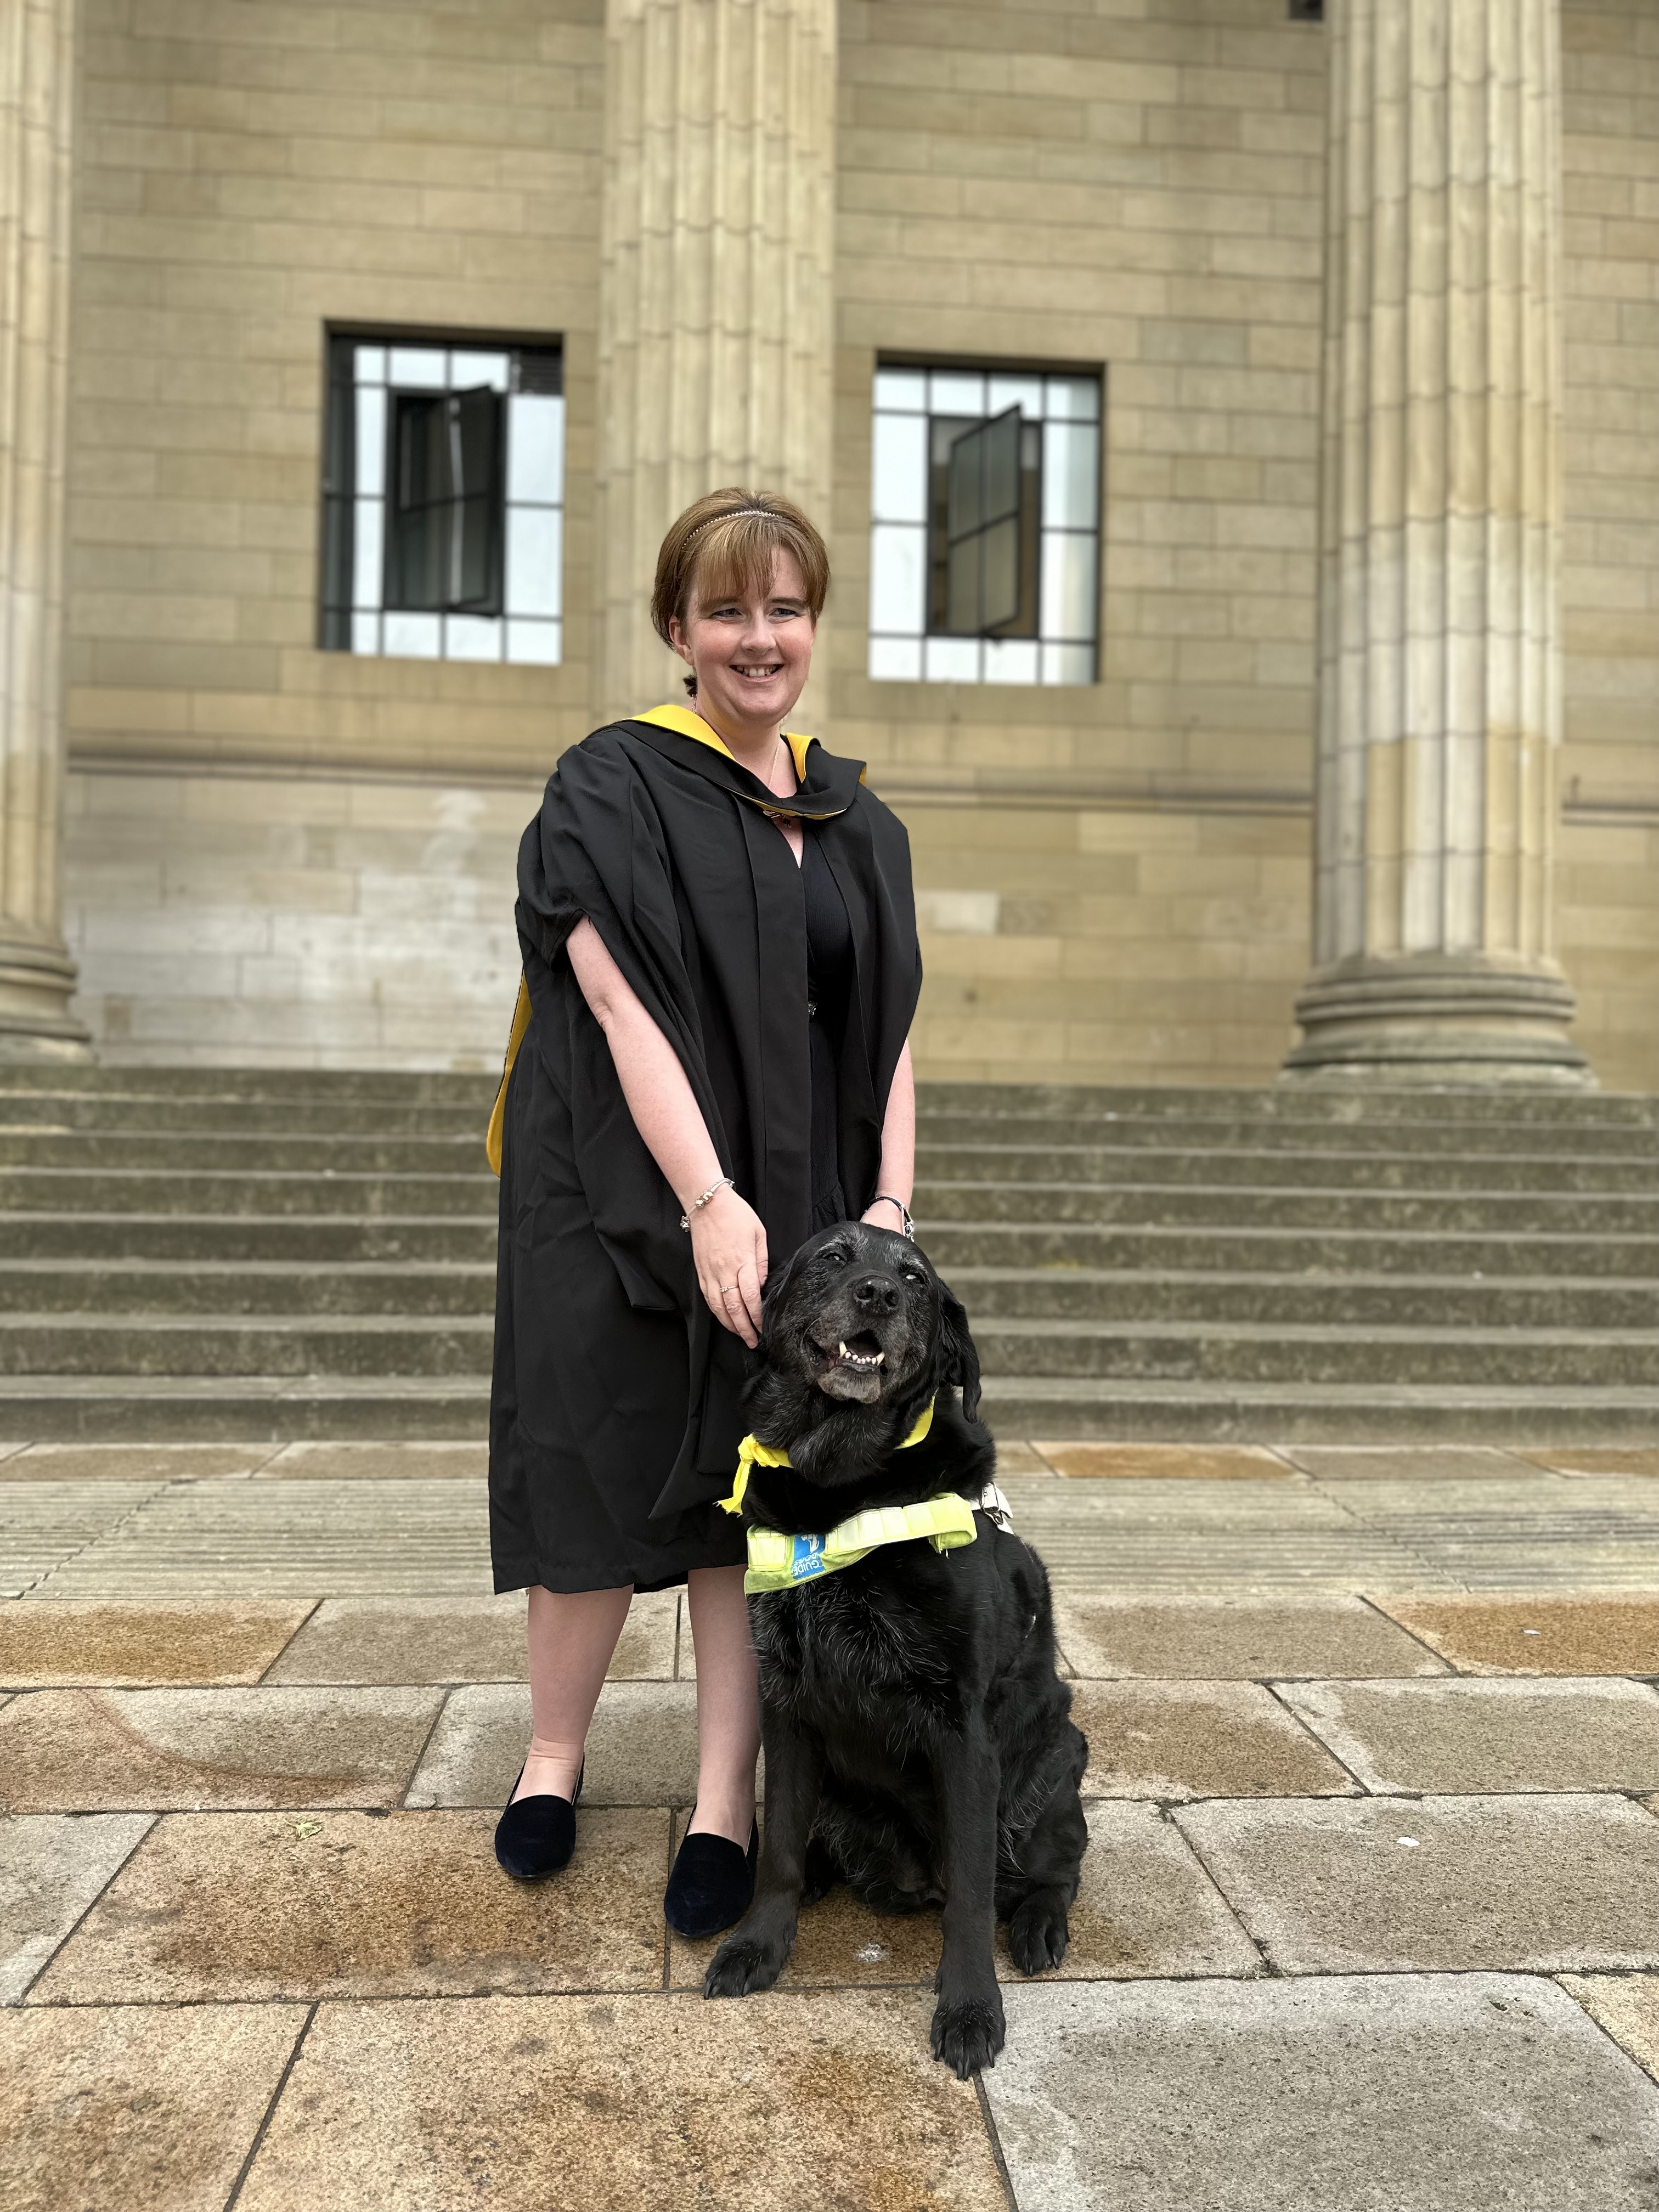 Leanne in her graduation gown with guide dog Wanda who also wears a yellows sash